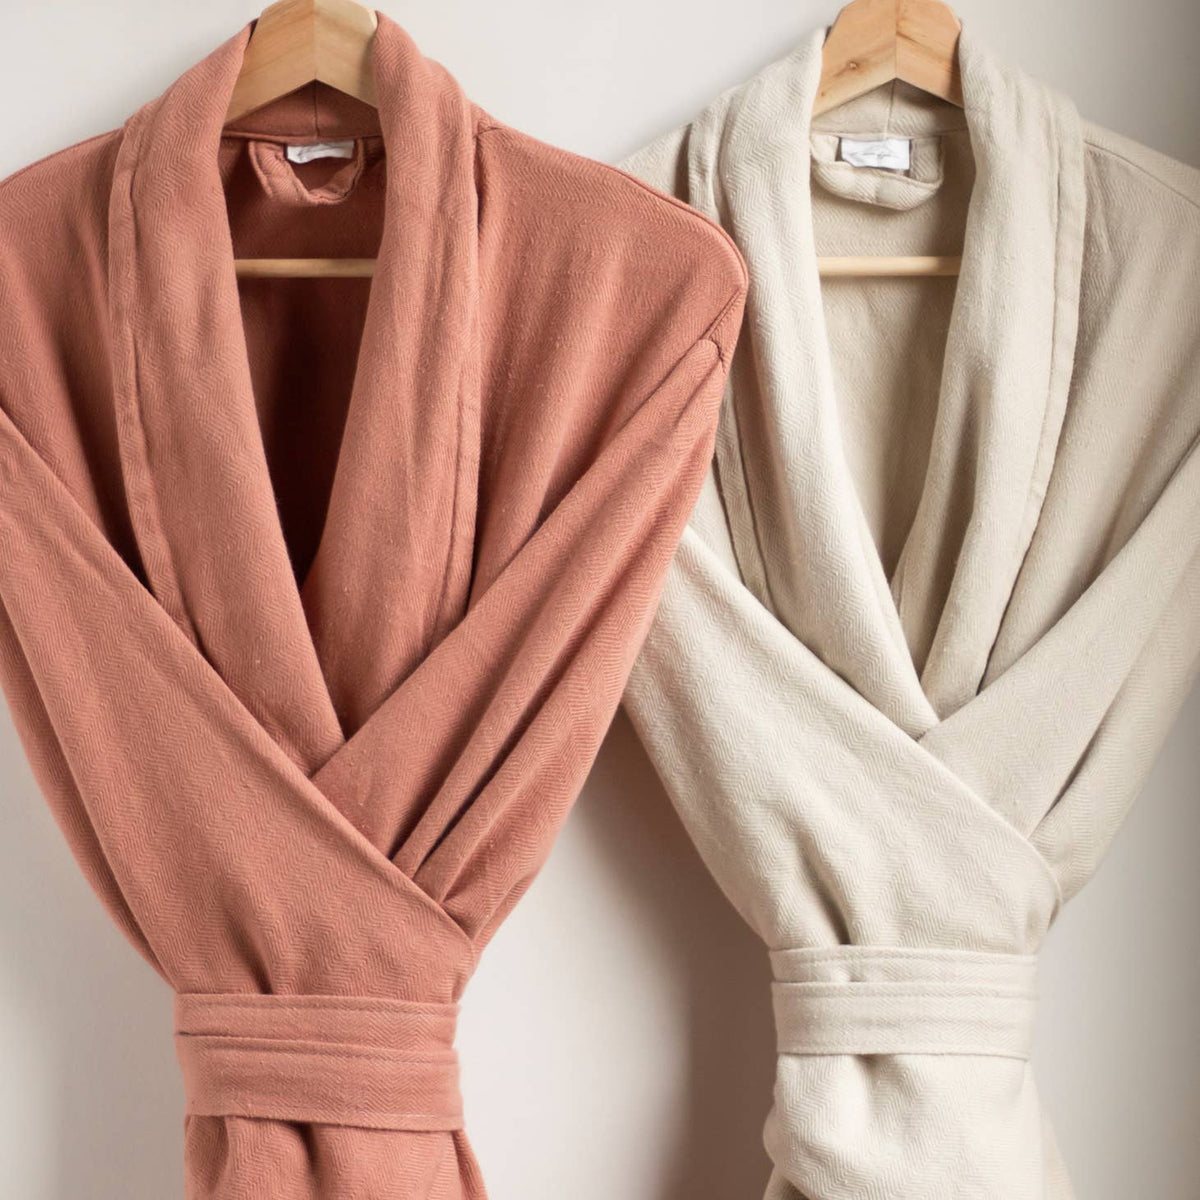 Bath Robes - Towelling & Cotton Robes